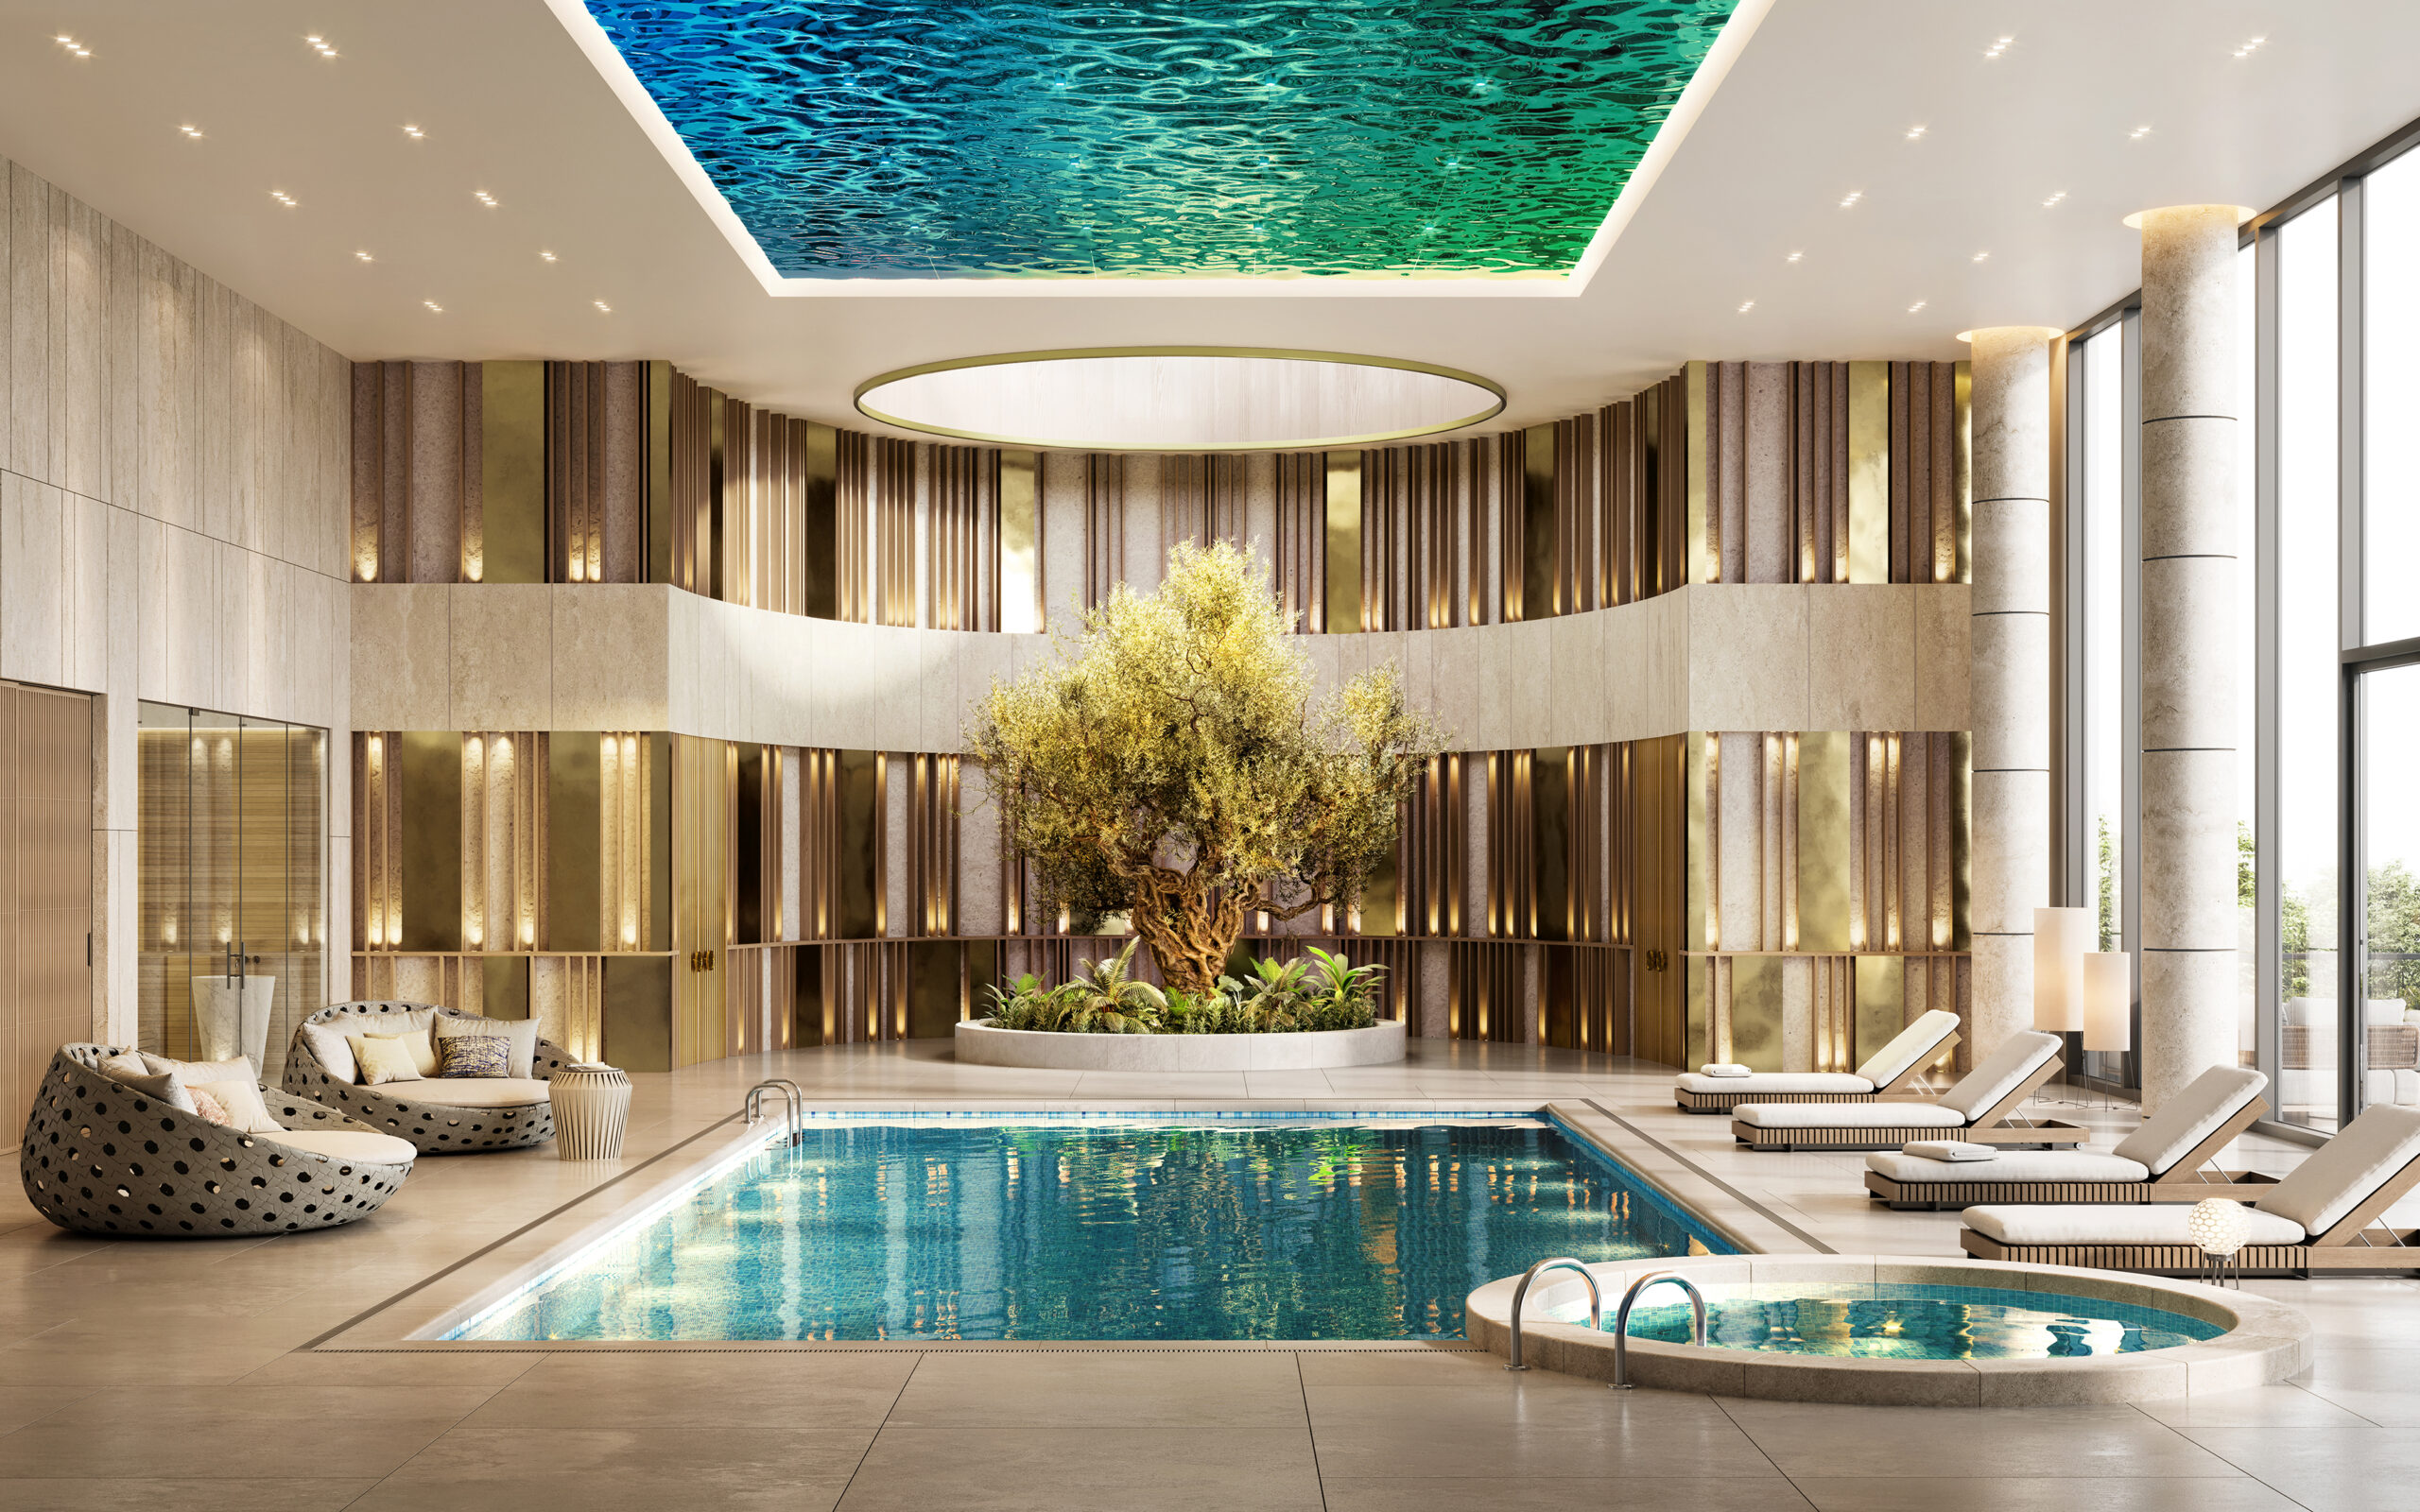 3D render of a luxury hotel swimming pool